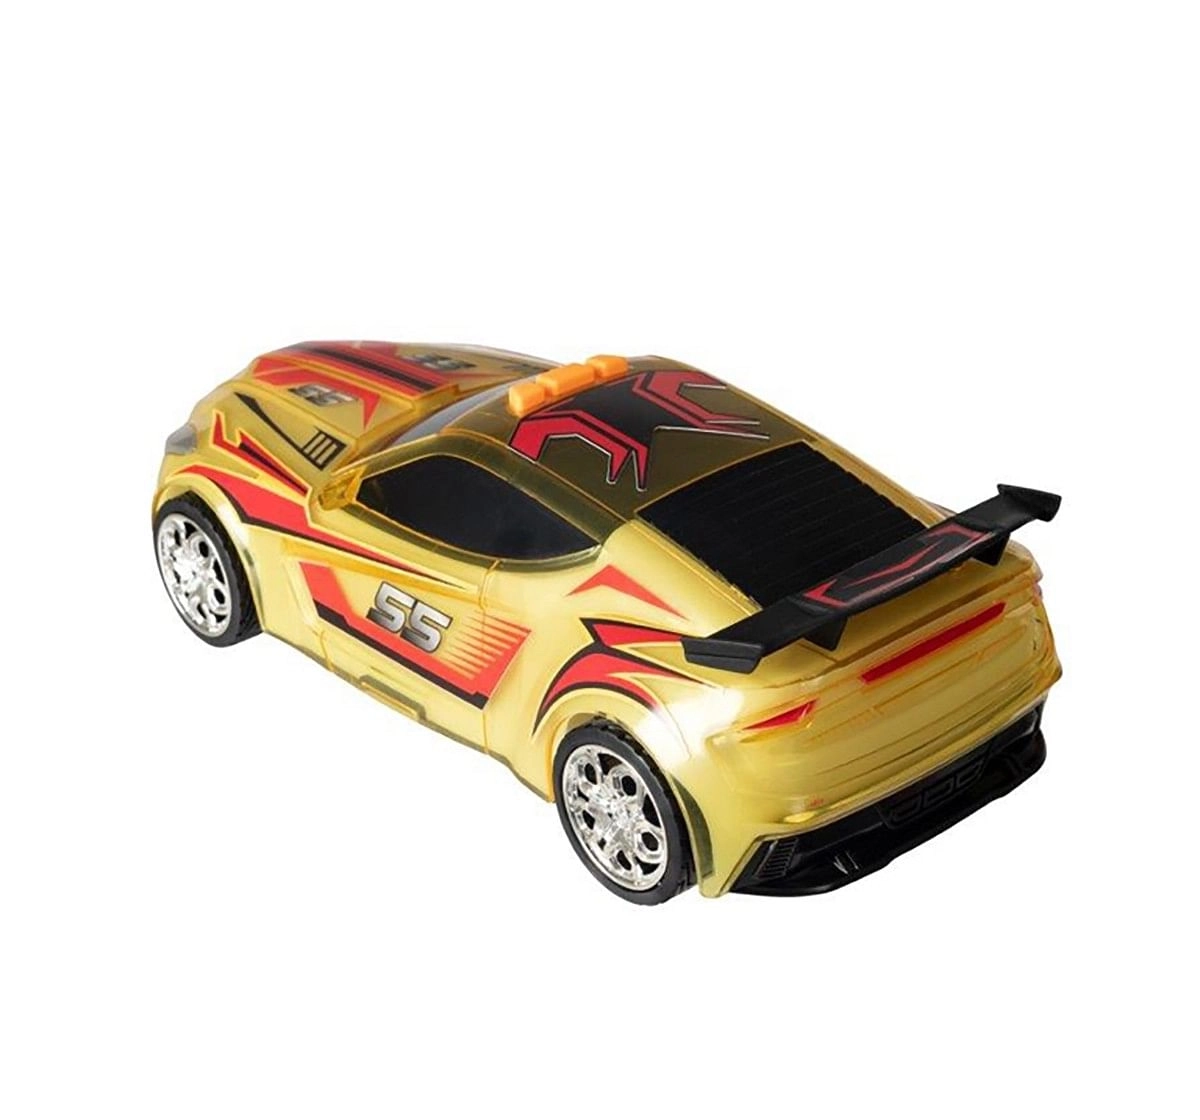 Teamsterz Light And Sound Street Starz Yellow Orange Car Vehicles for Kids age 3Y+ 